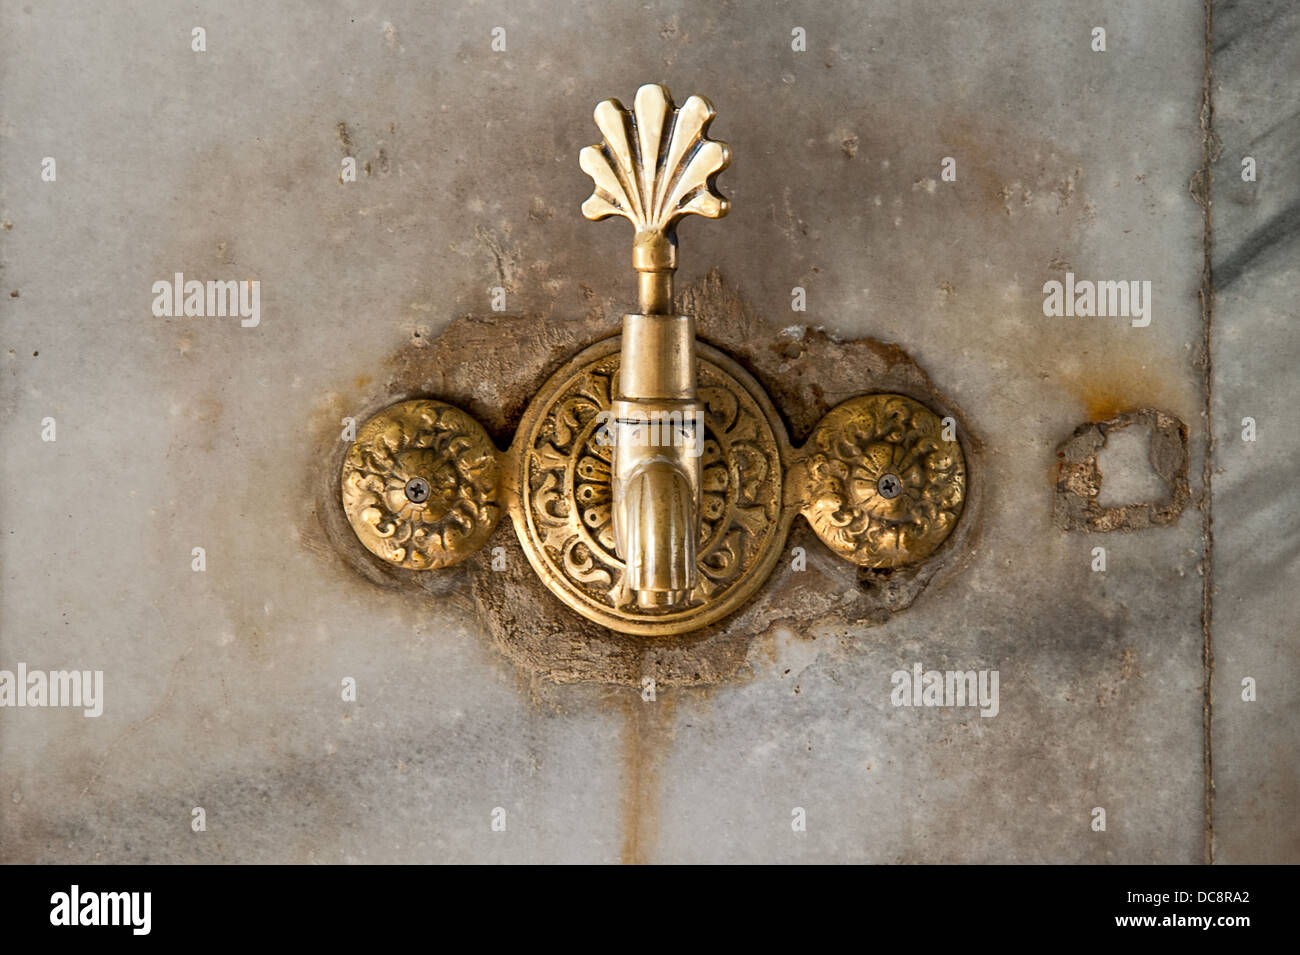 Ornate tap on a marble wall Stock Photo